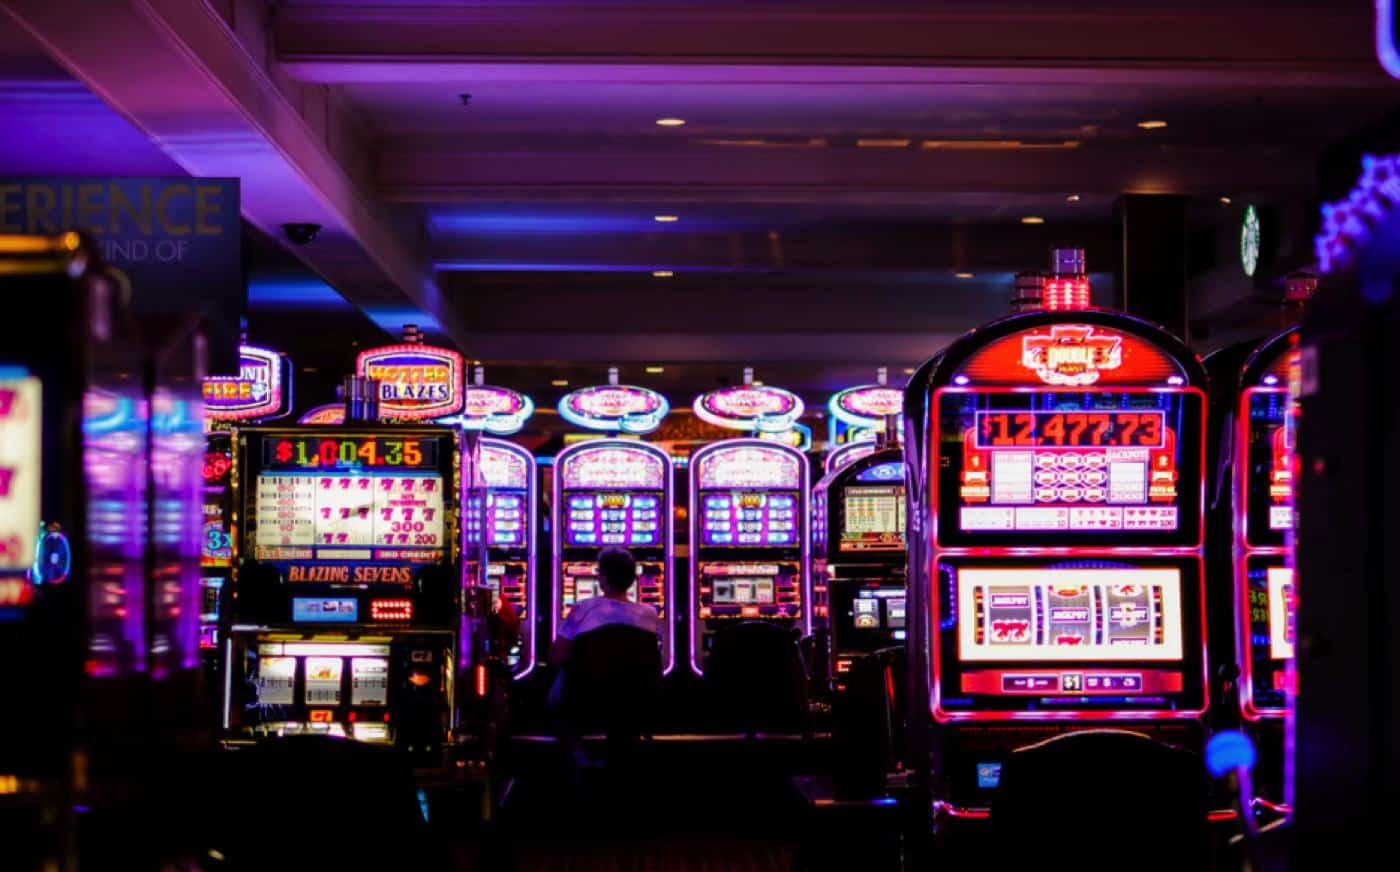 Which Games Pay the Most in Online Slots vs. Land-Based Slots?